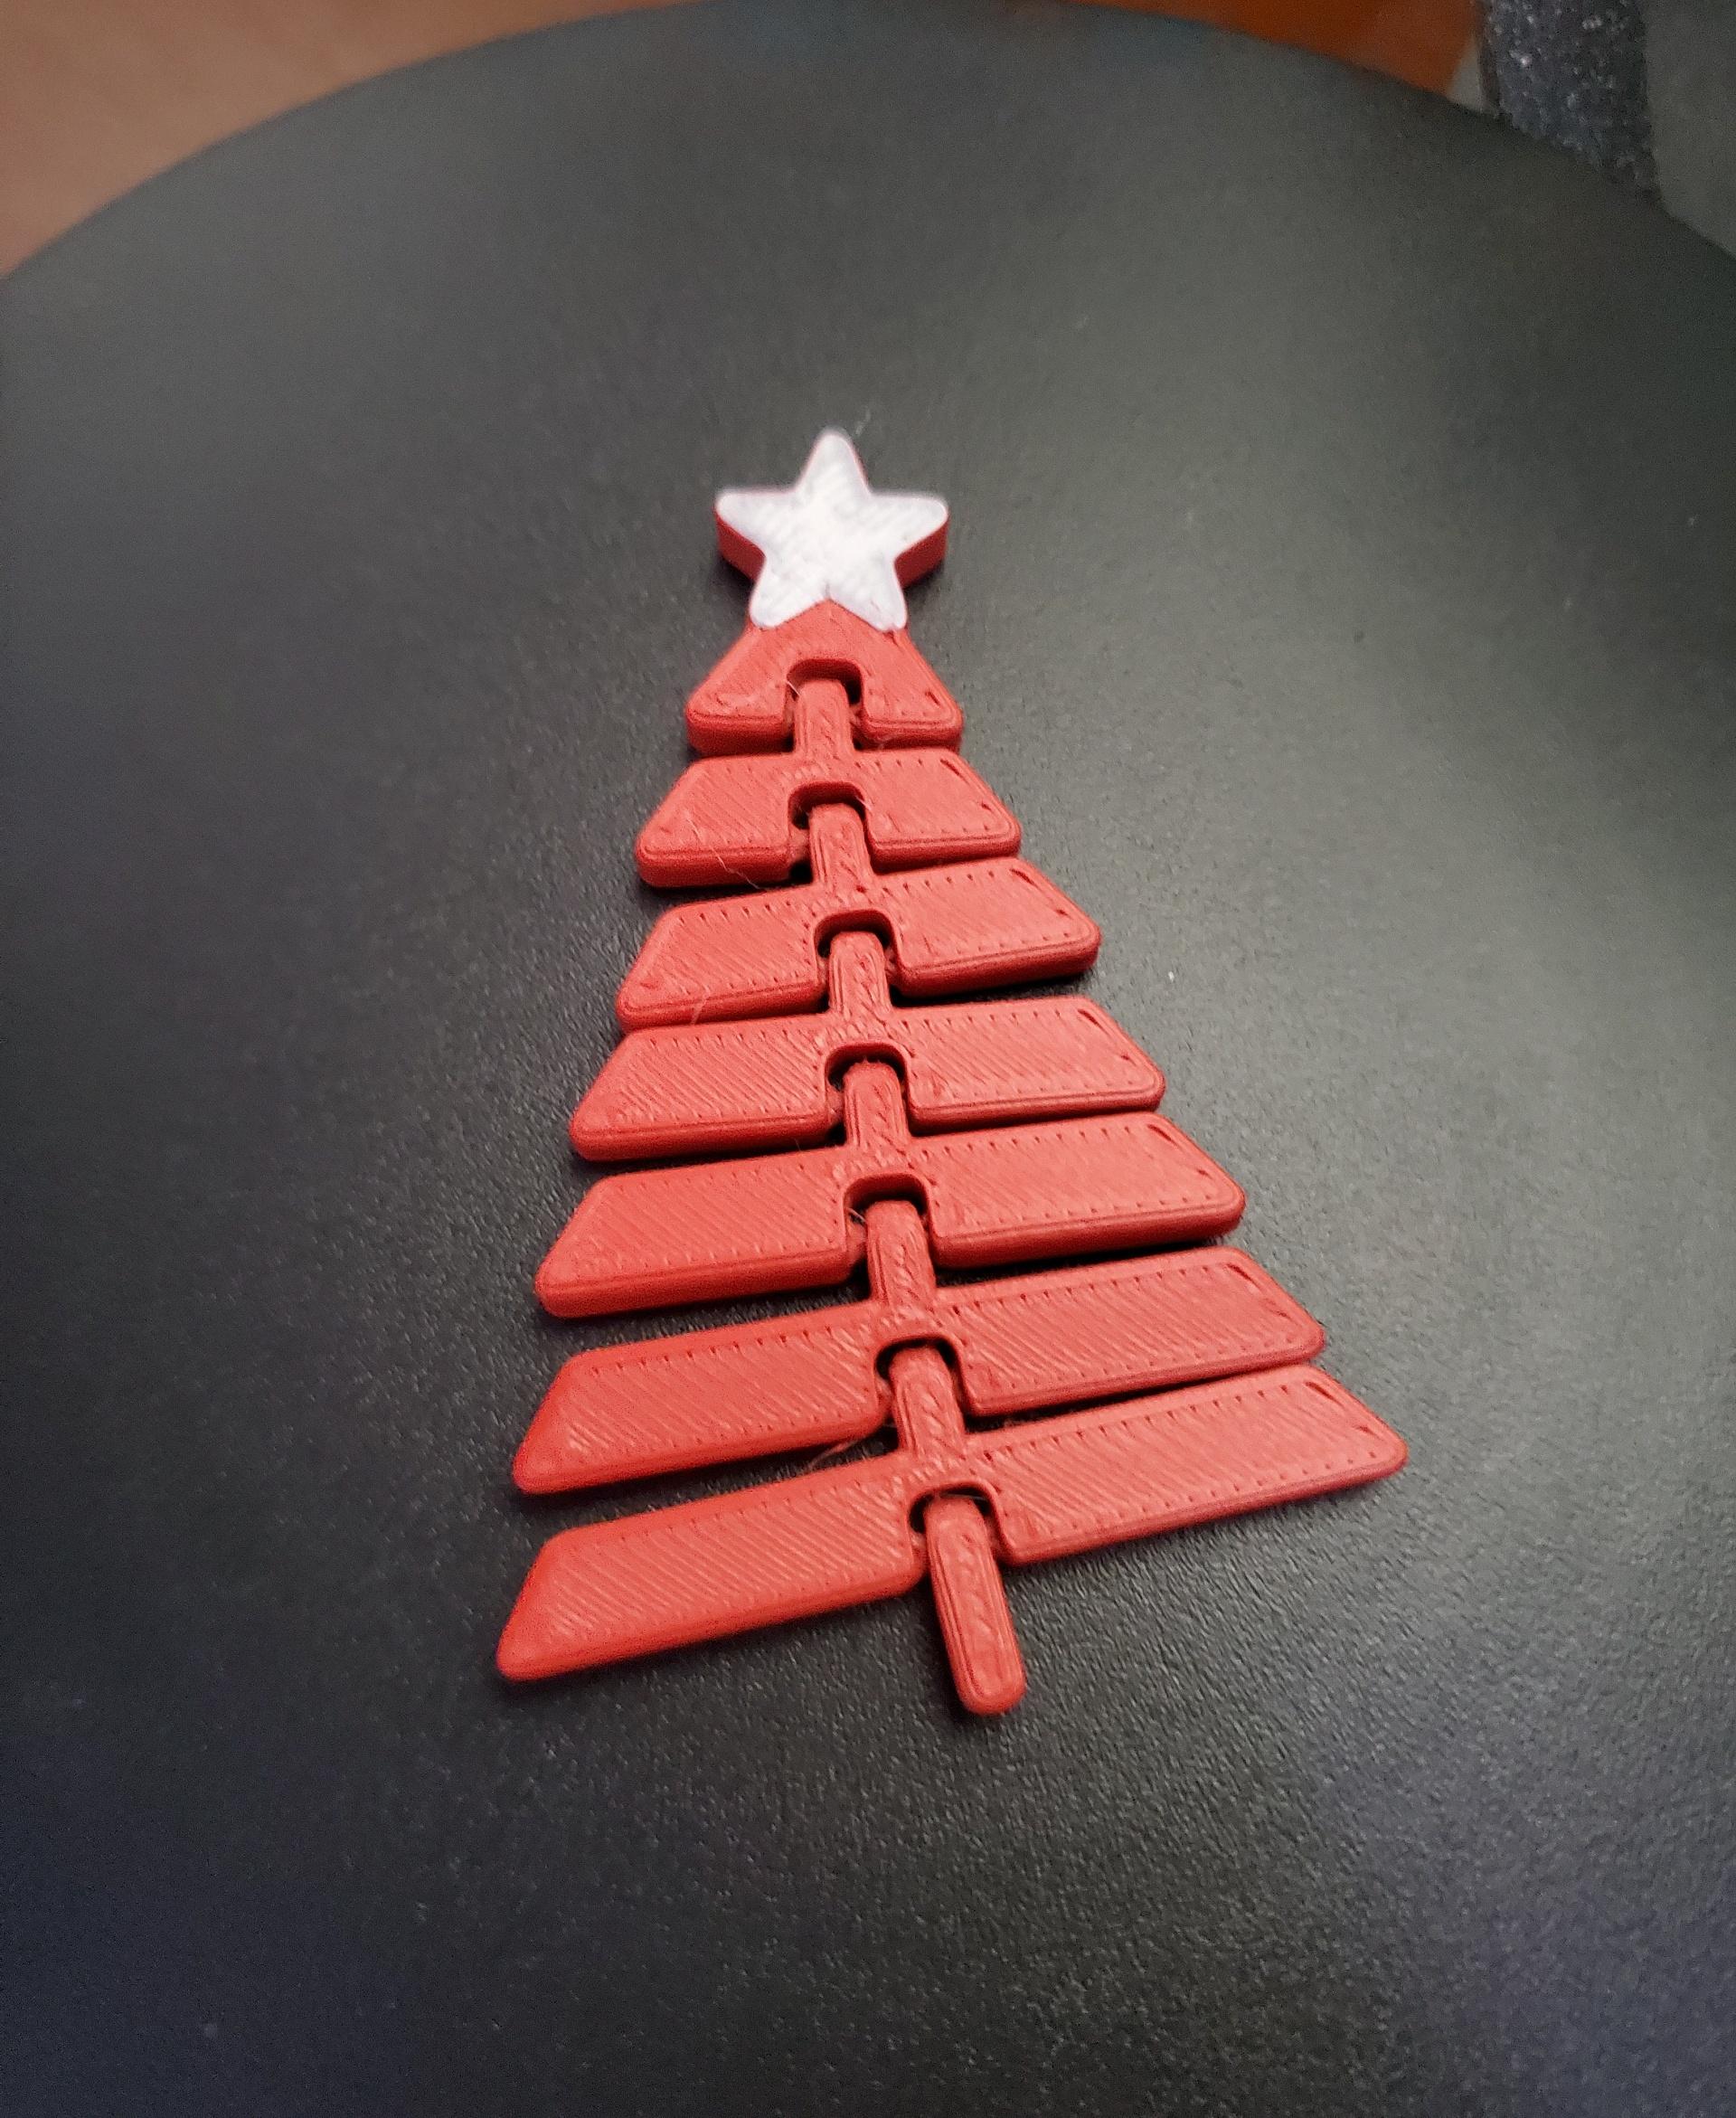 Articulated Christmas Tree with Star - Print in place fidget toy - 3mf - polyterra army red - 3d model